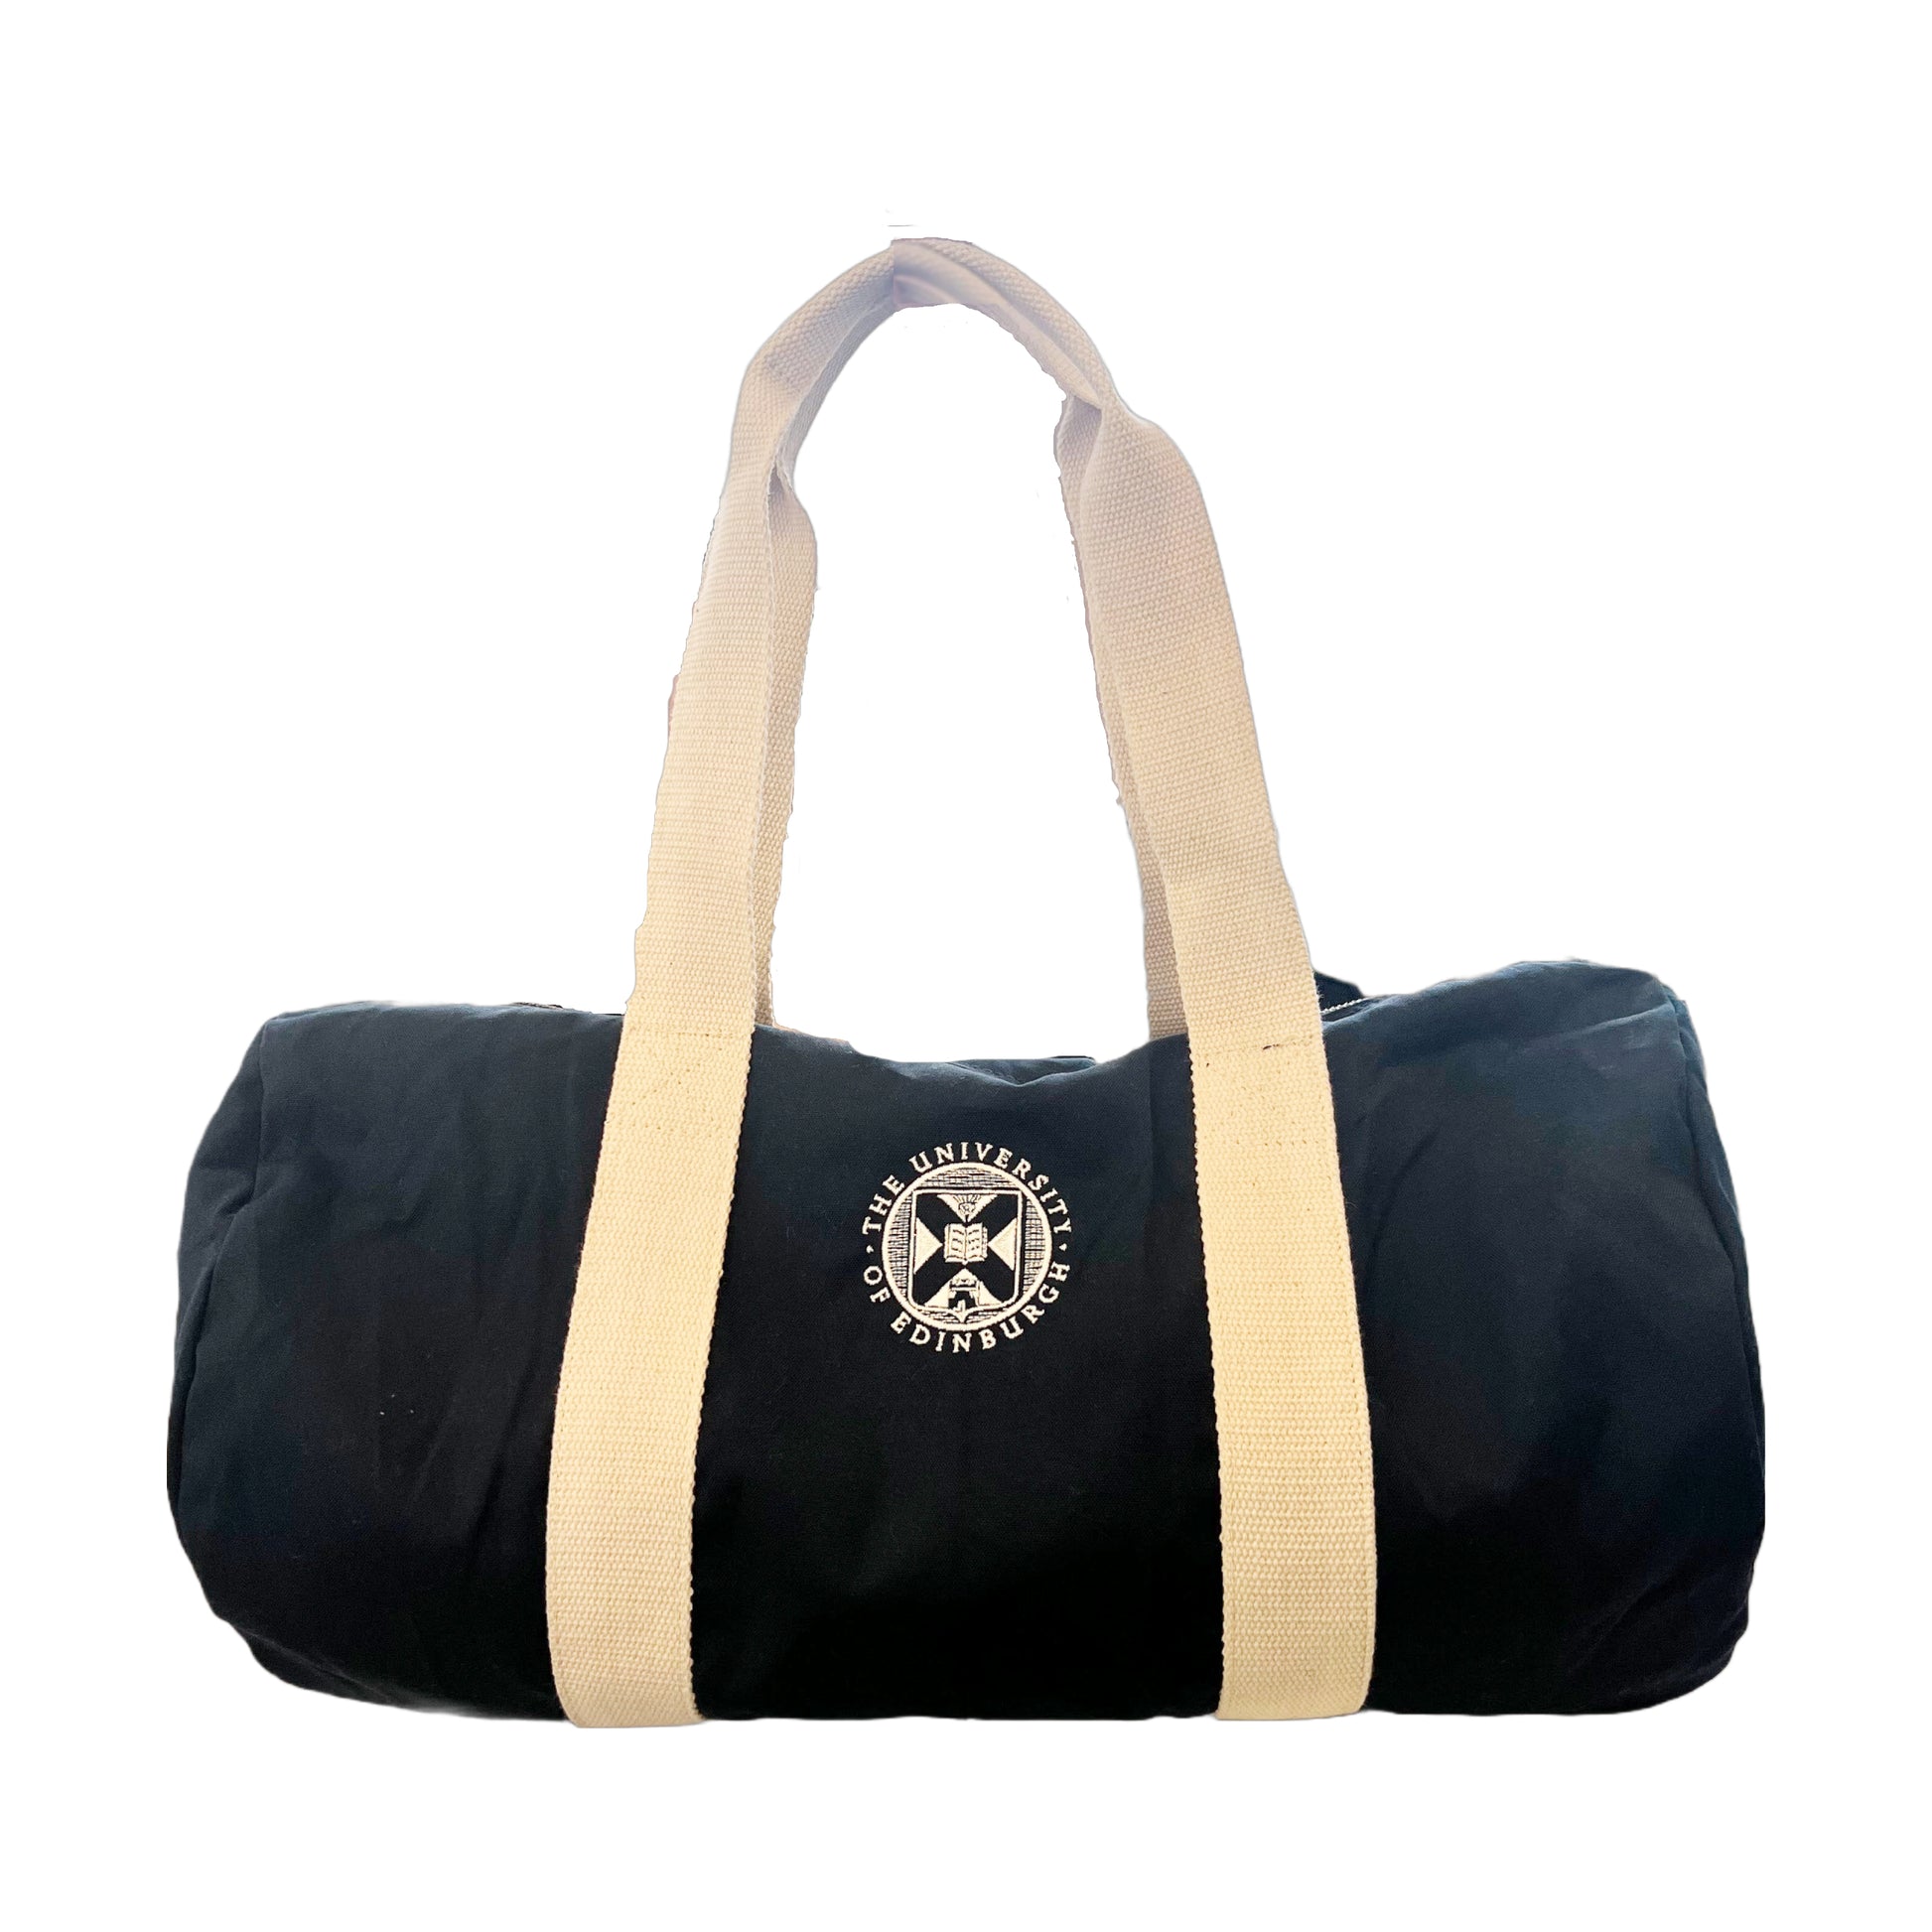 Navy barrel shaped canvas bag with cream handles. University crest is embriodered in the centre